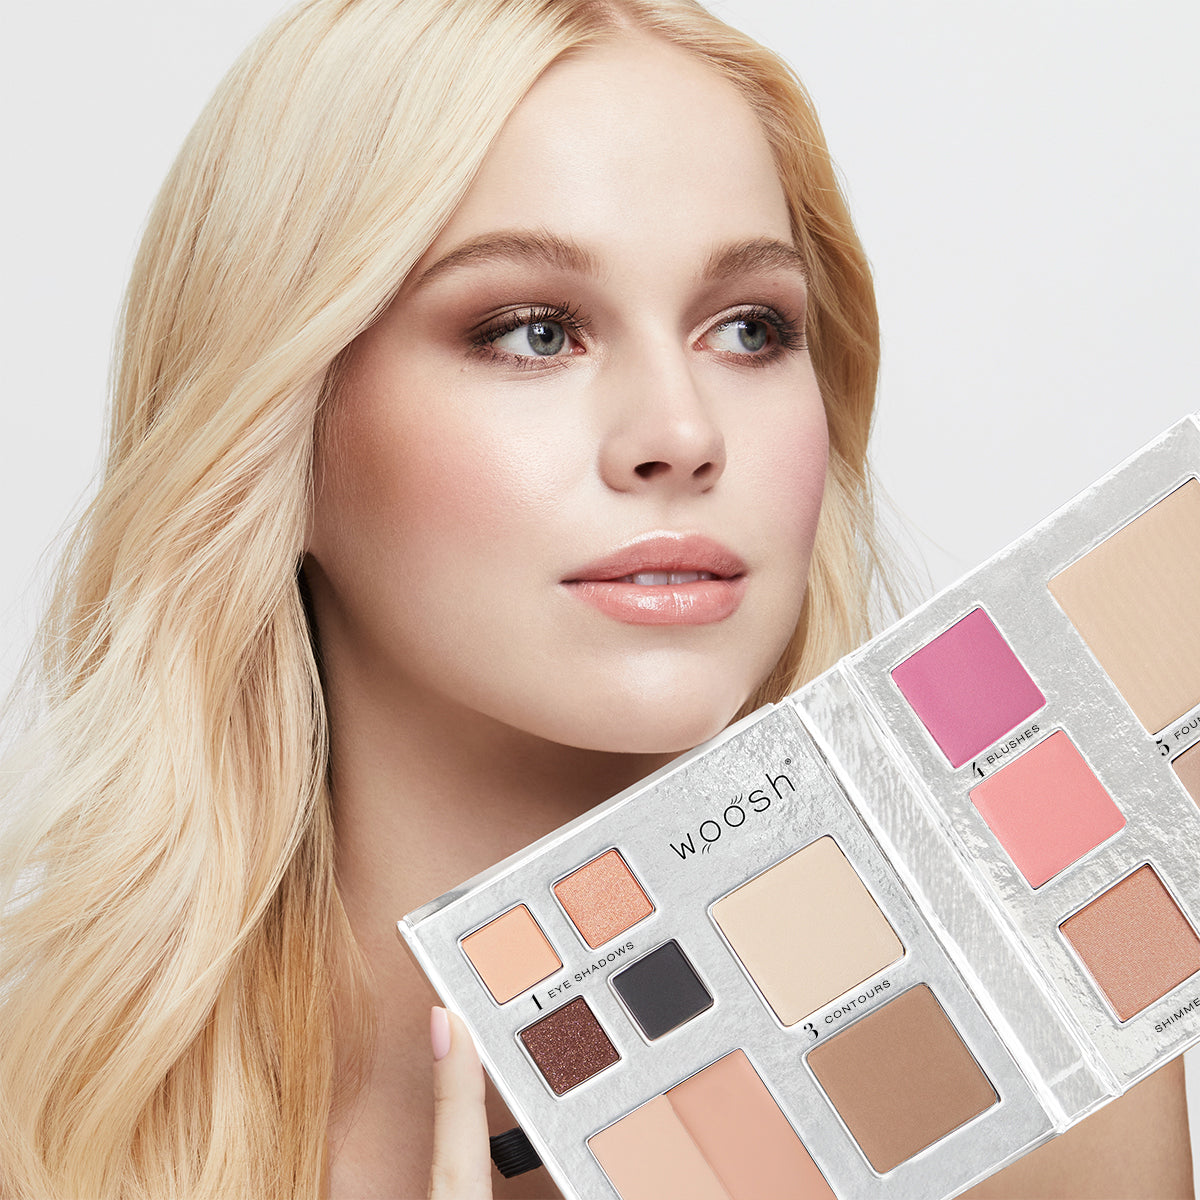 a photo of a fair-skinned model wearing beautiful, natural-looking makeup holding the Fold Out Face palette in shade #1 light